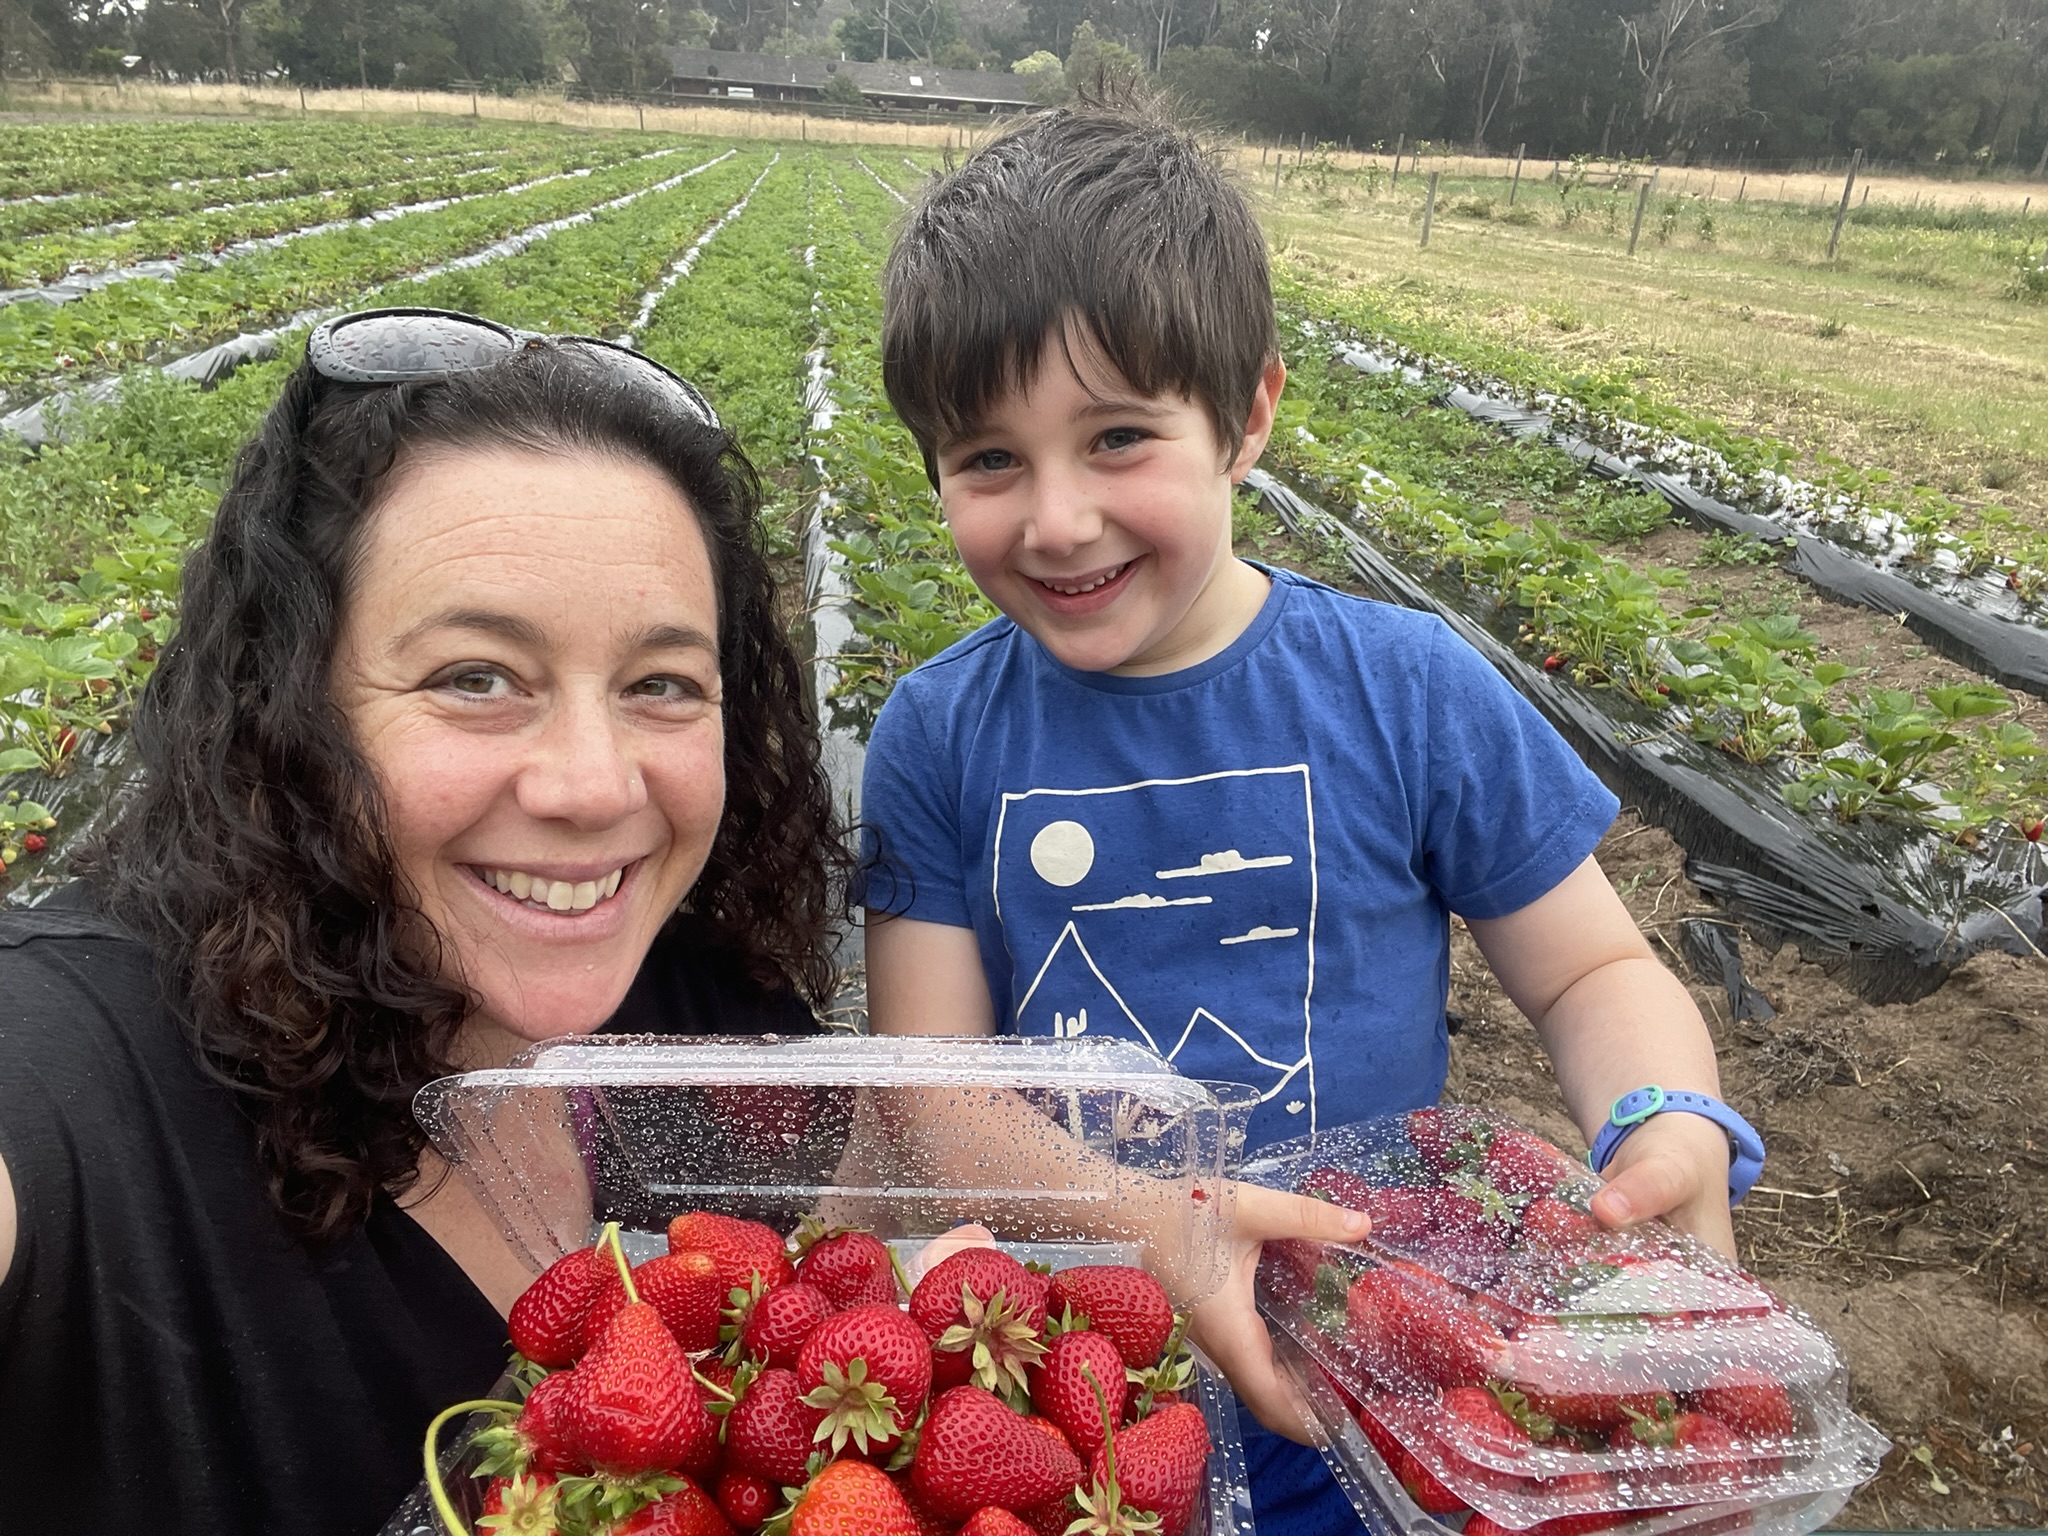 Mother and son picking strawberries